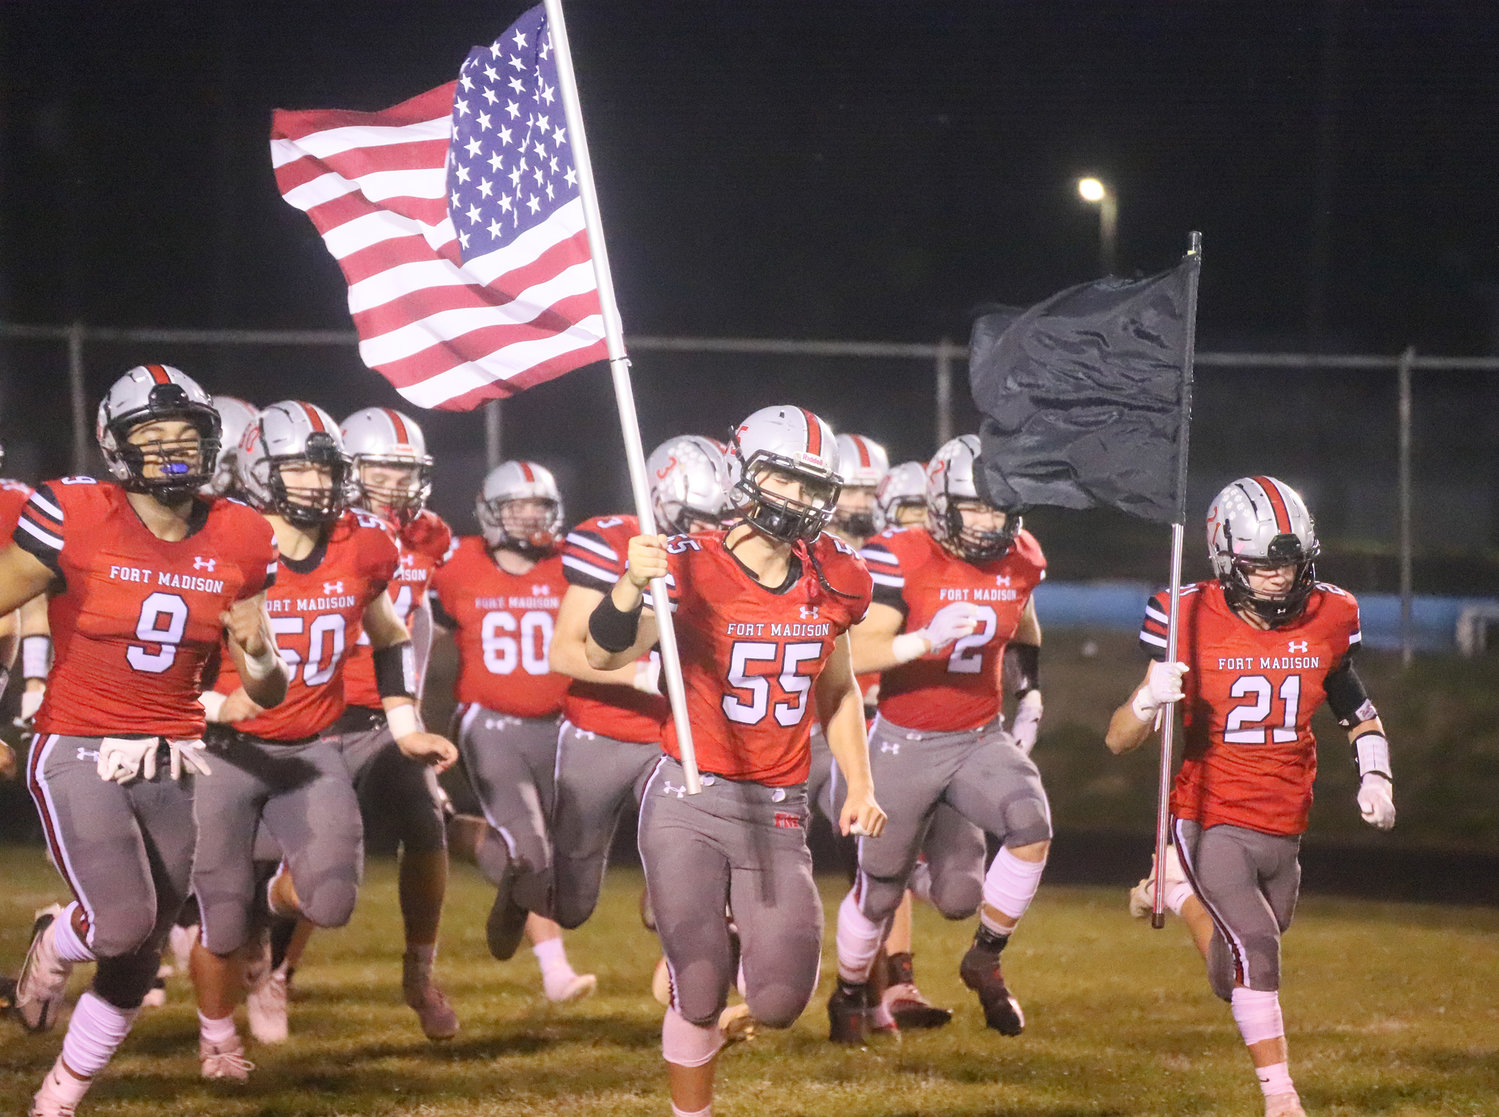 The Fort Madison Bloodhounds bring the American Flag into the stadium as part of the normal routine to start all football games.